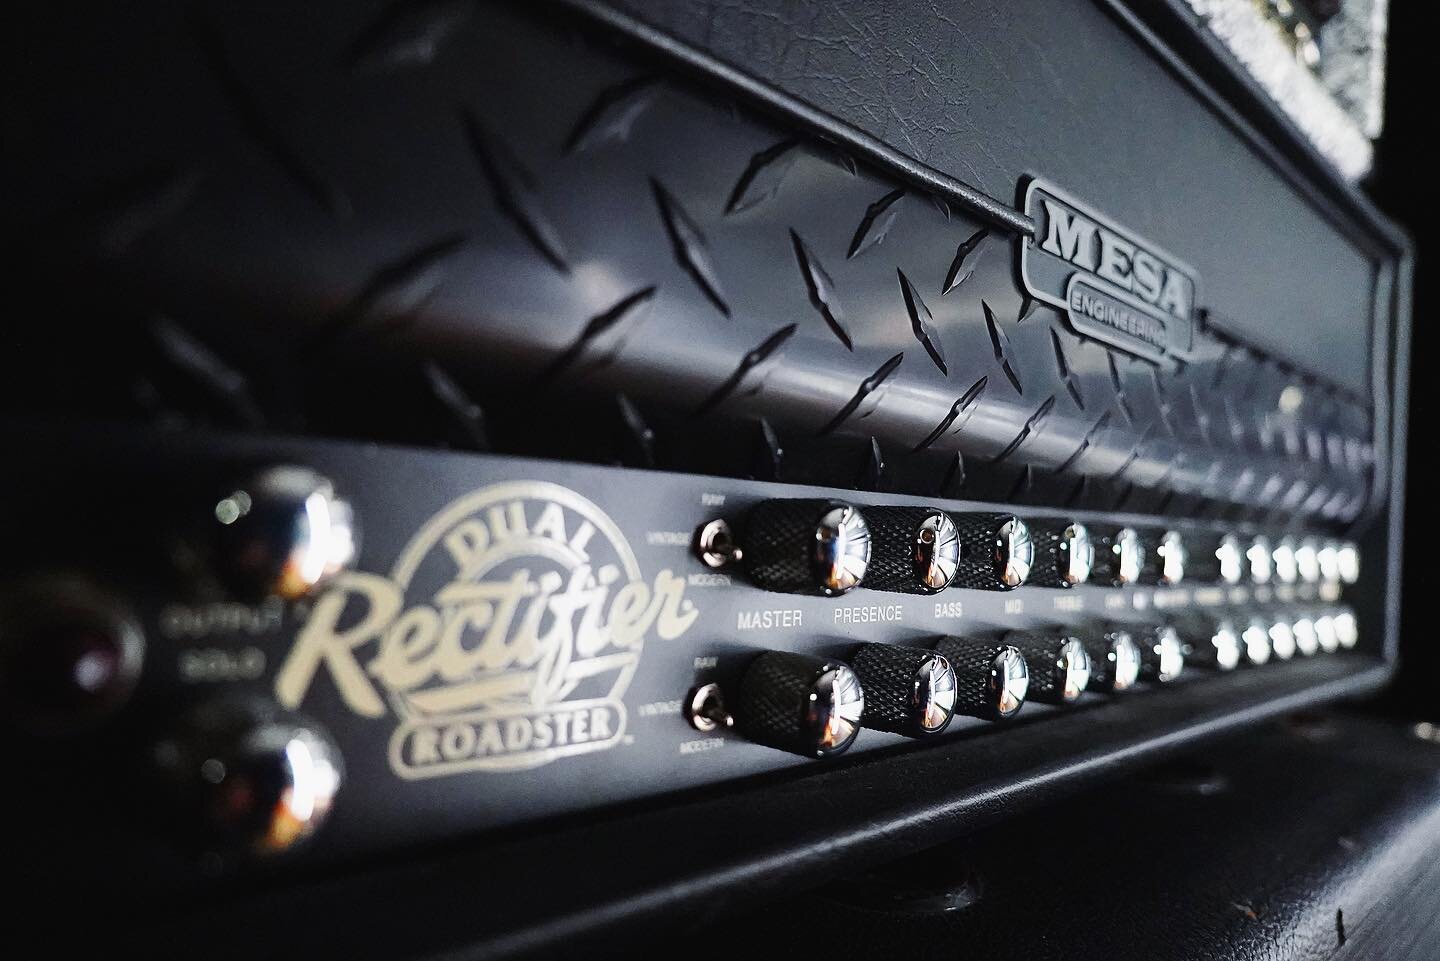 &ldquo;After a long, loud and inspired play test, Carlos [Santana] looked around at Randy and the onlookers that had gathered at the store and said, &lsquo;Man, that amp really Boogies!&rsquo;&rdquo;&thinsp;
&thinsp;
&thinsp;
&thinsp;
#mesaboogie #bo